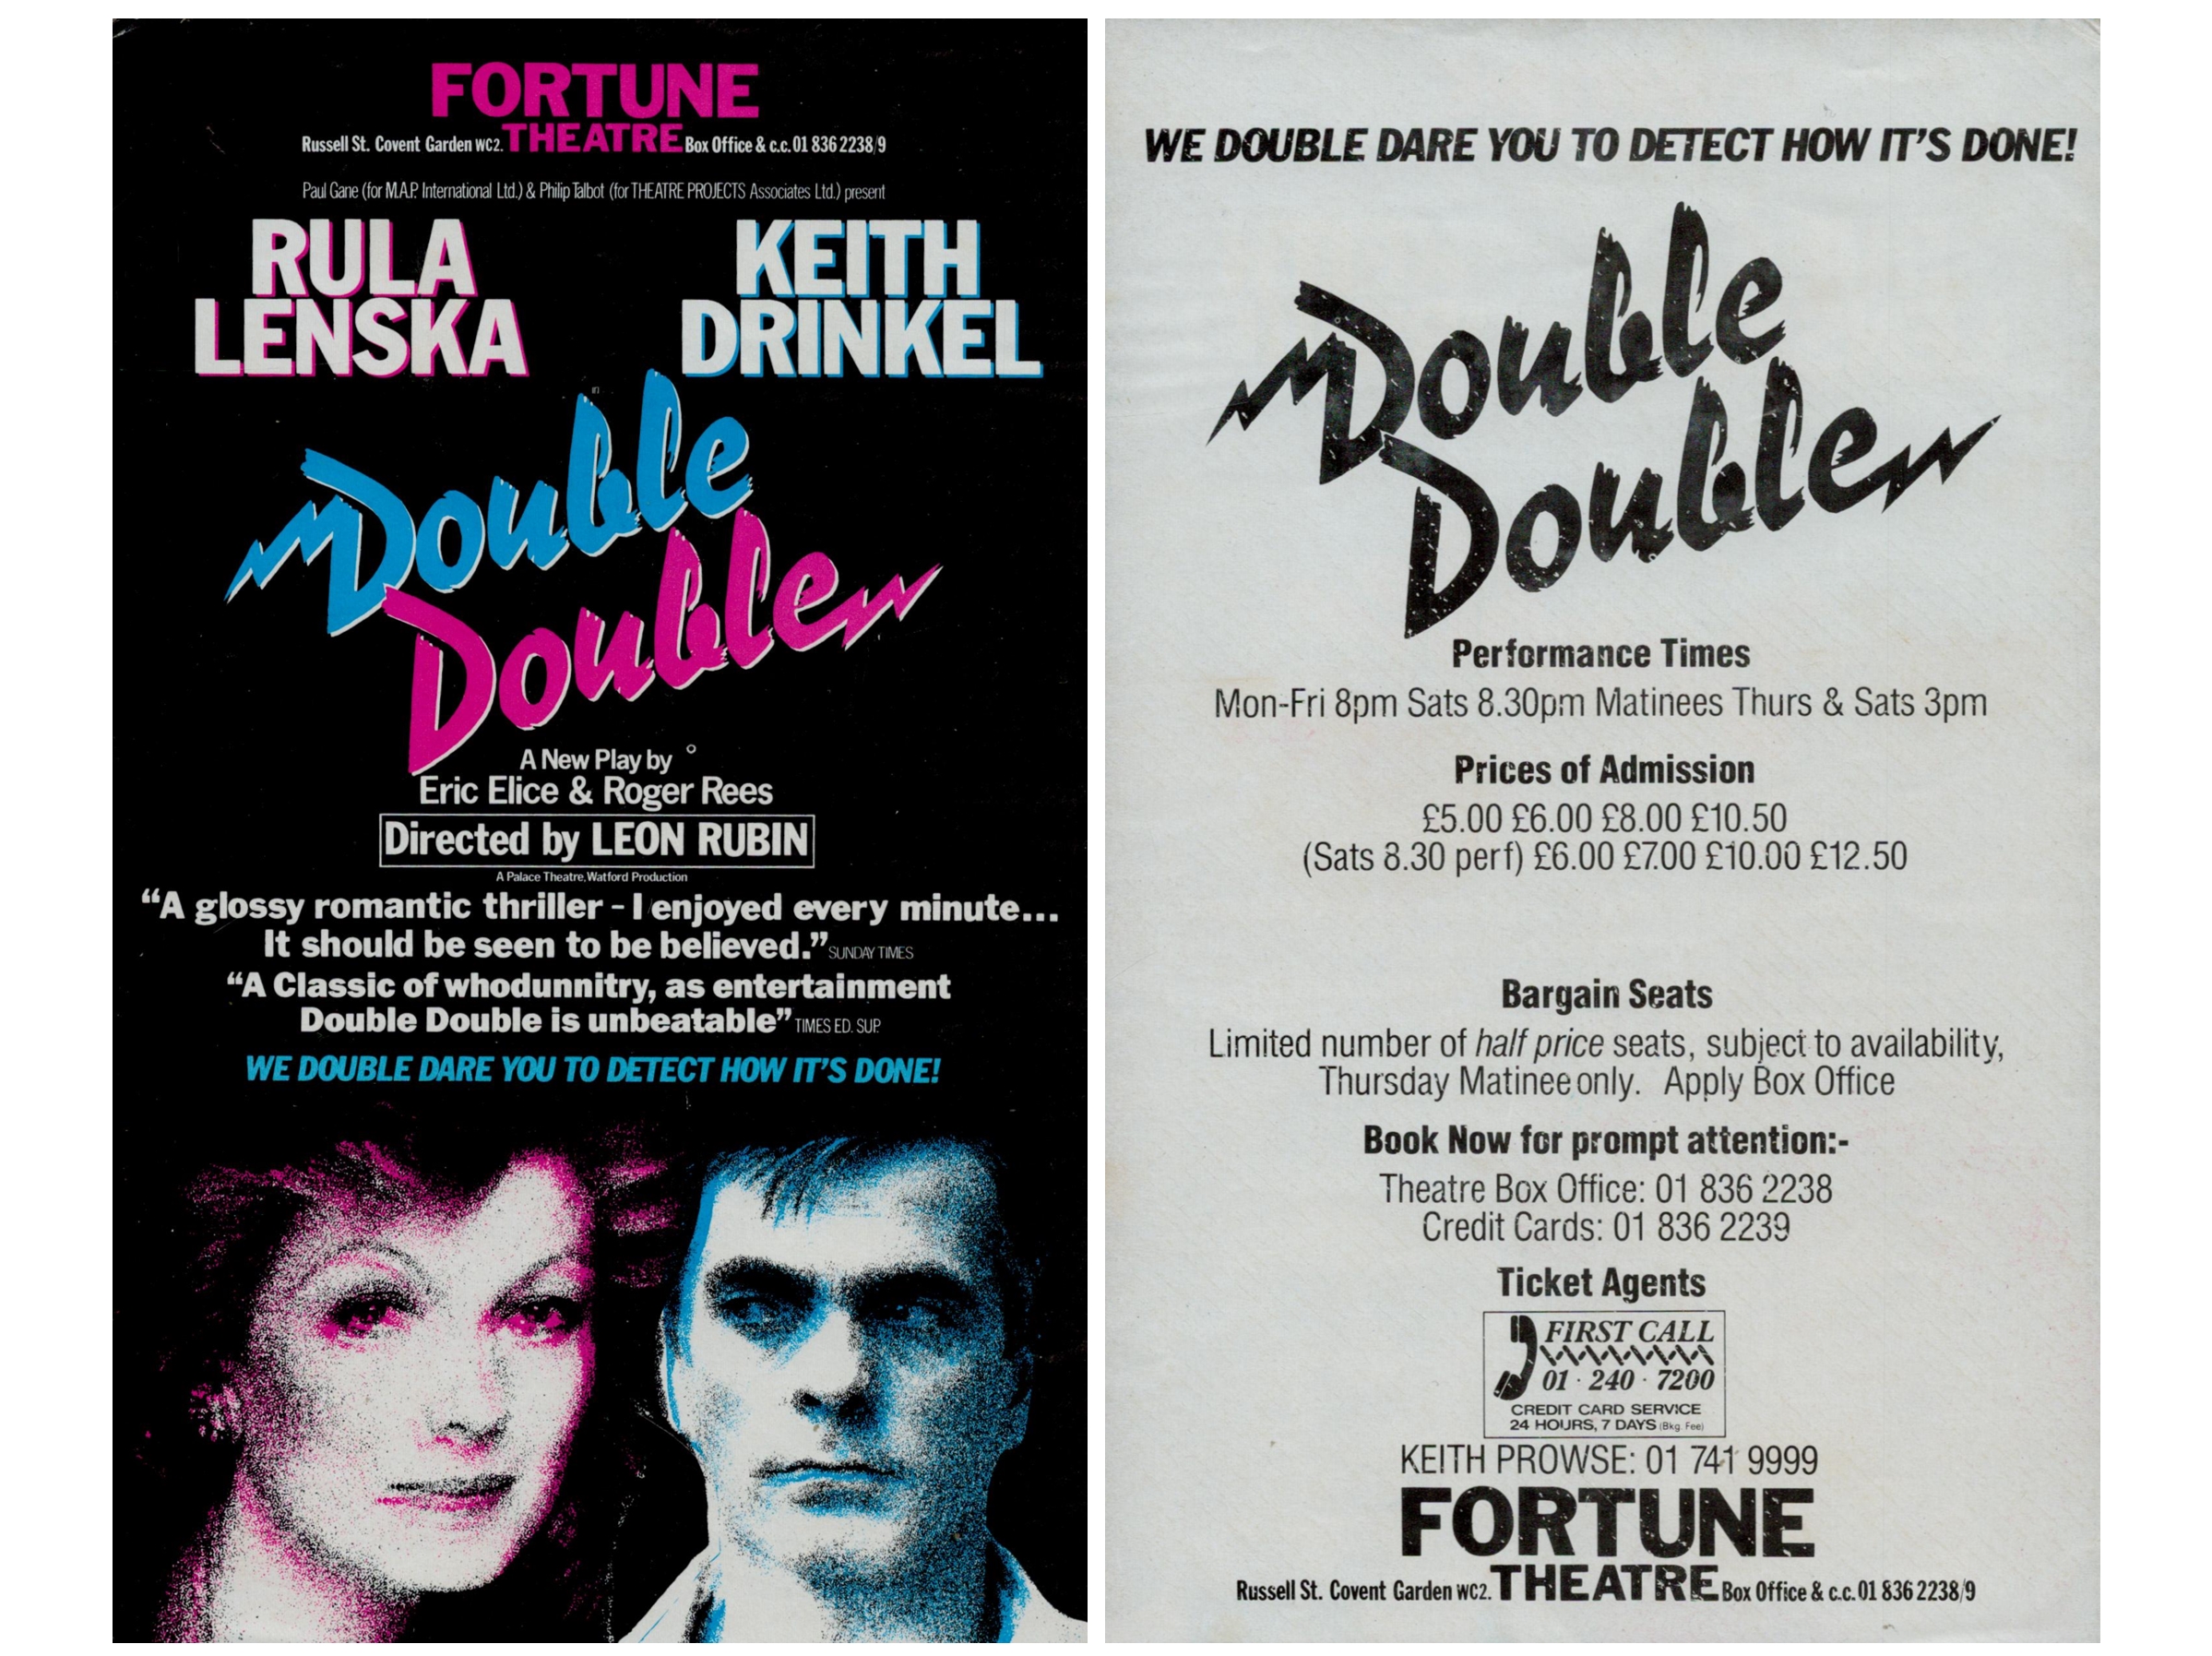 Multi signed black, White photo Keith Drinkel, Rula Lenska 10x8 Inch includes Theatre flyer. - Image 2 of 2